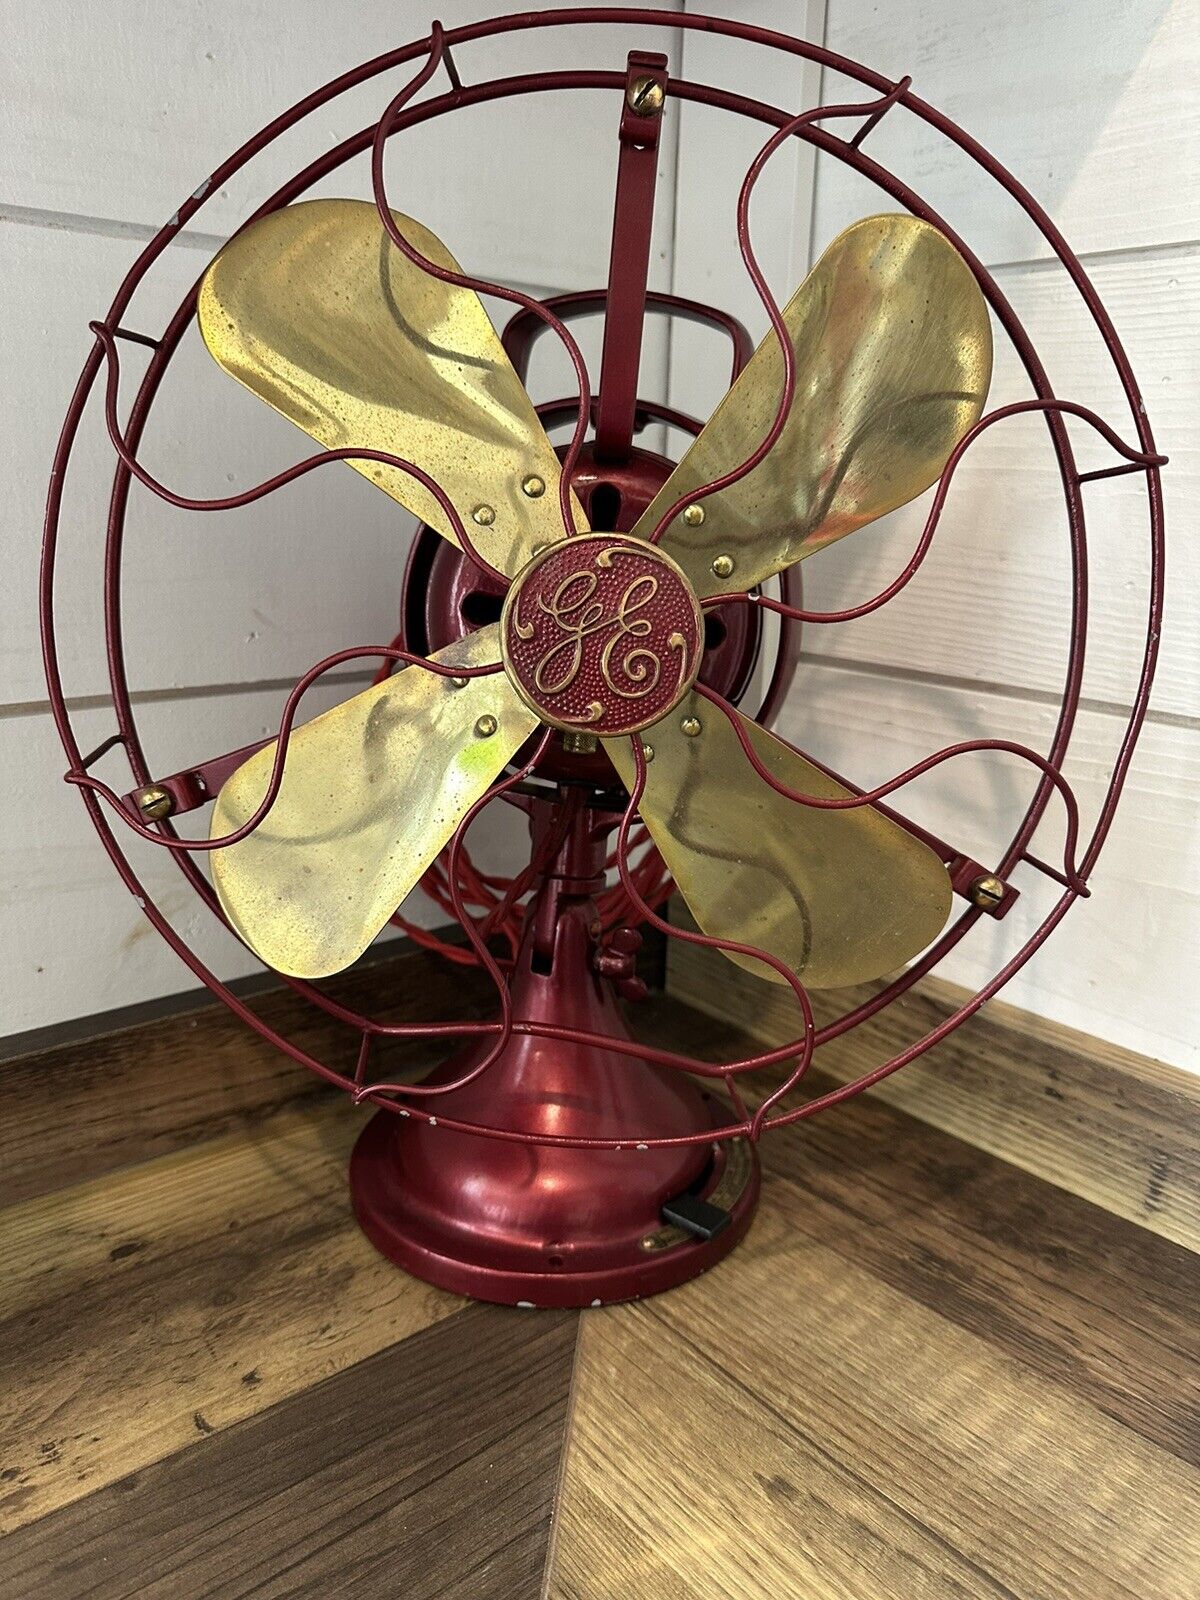 1918 GE Antique Three Speed Fan, Brass Blades & Accents, Restored Real Beauty